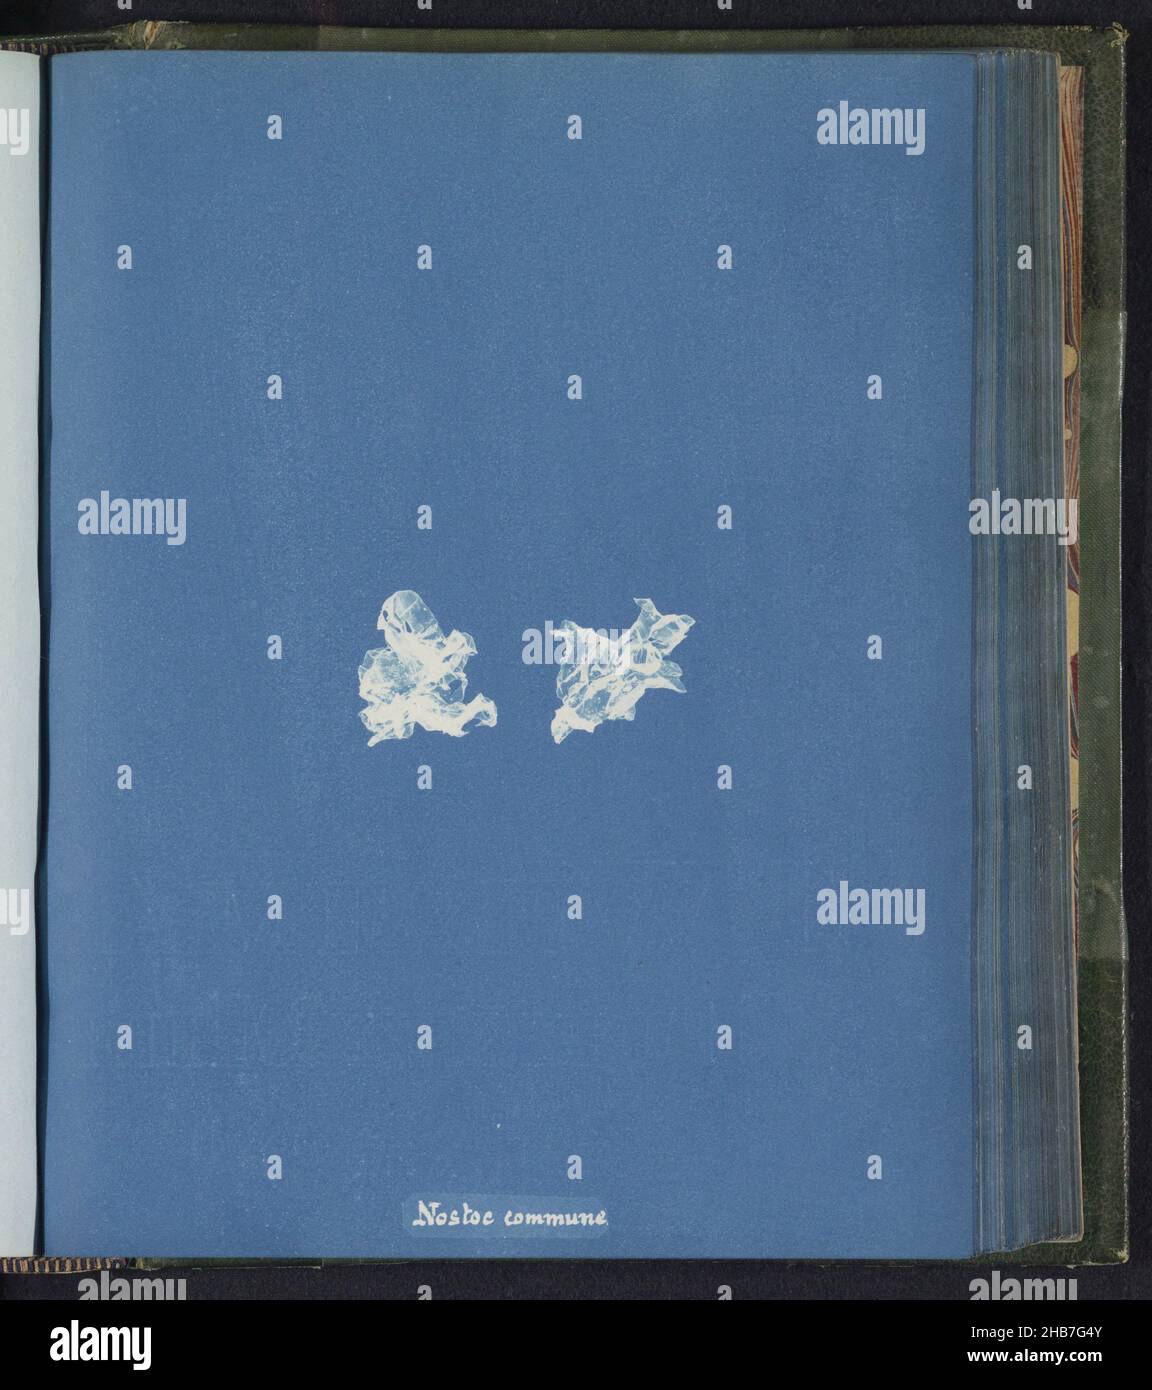 Nostoc commune, Anna Atkins, United Kingdom, c. 1843 - c. 1853, photographic support, cyanotype, height 250 mm × width 200 mm Stock Photo